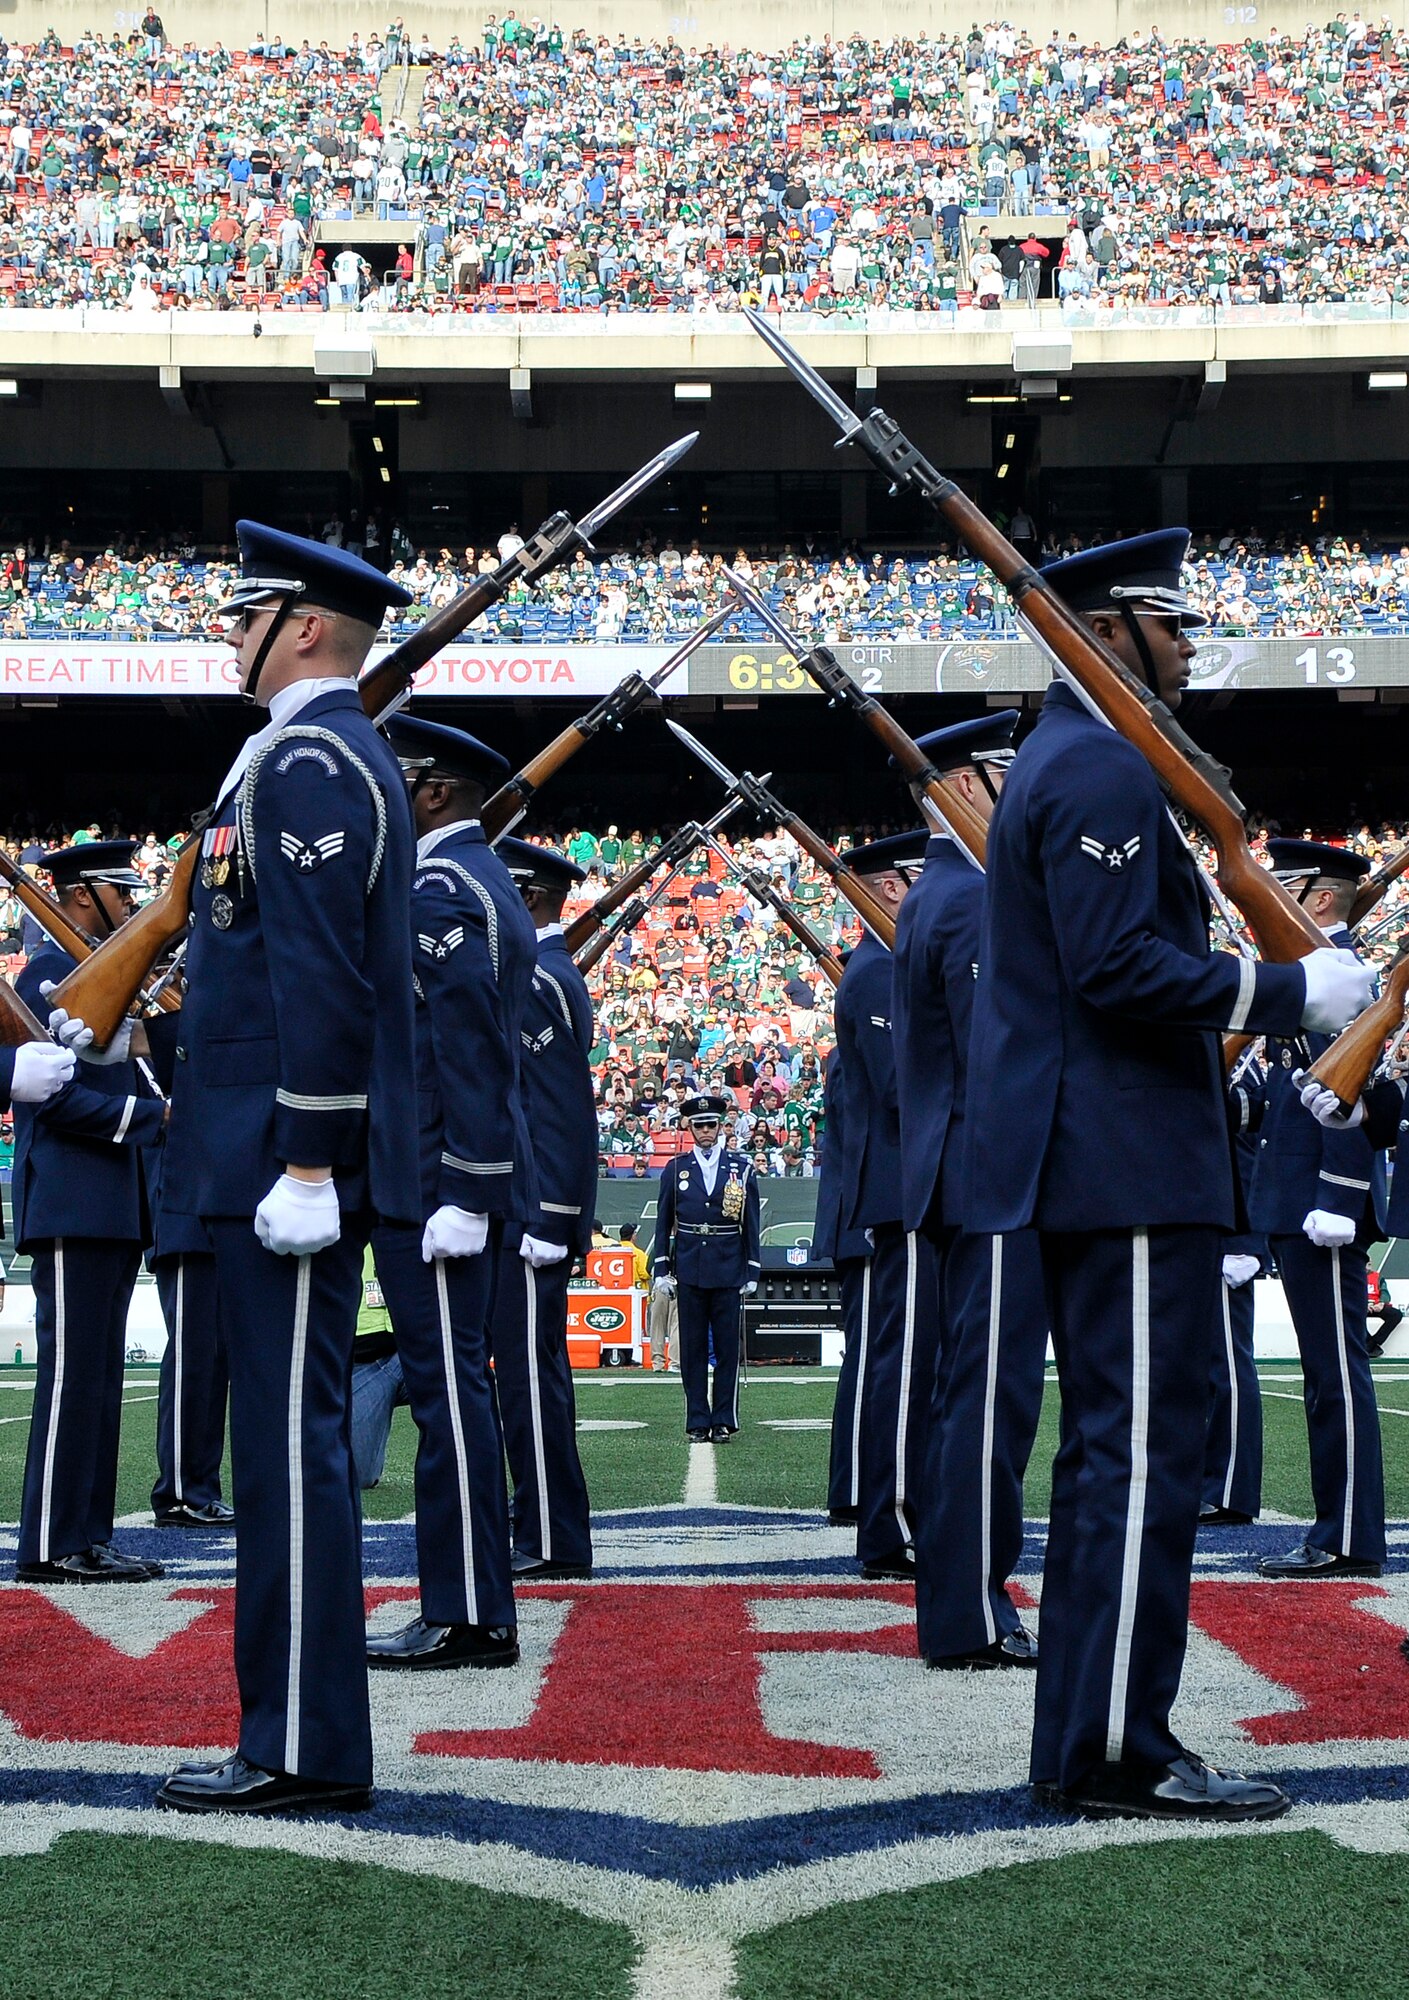 The United States Air Force Honor Guard Drill Team performs during the halftime show at a New York Jets football game against the Jacksonville Jaguars at Giants Stadium Nov. 15, in East Rutherford, New Jersey. The Drill Team tours worldwide to showcase the discipline and professionalism necessary to be a United States Air Force Airman. During the Air Force Honor Guard's 60-year history, their traveling component, the Drill Team, has performed in every state of the union and many countries abroad. (U.S. Air Force photo/Senior Airman Marleah Miller)